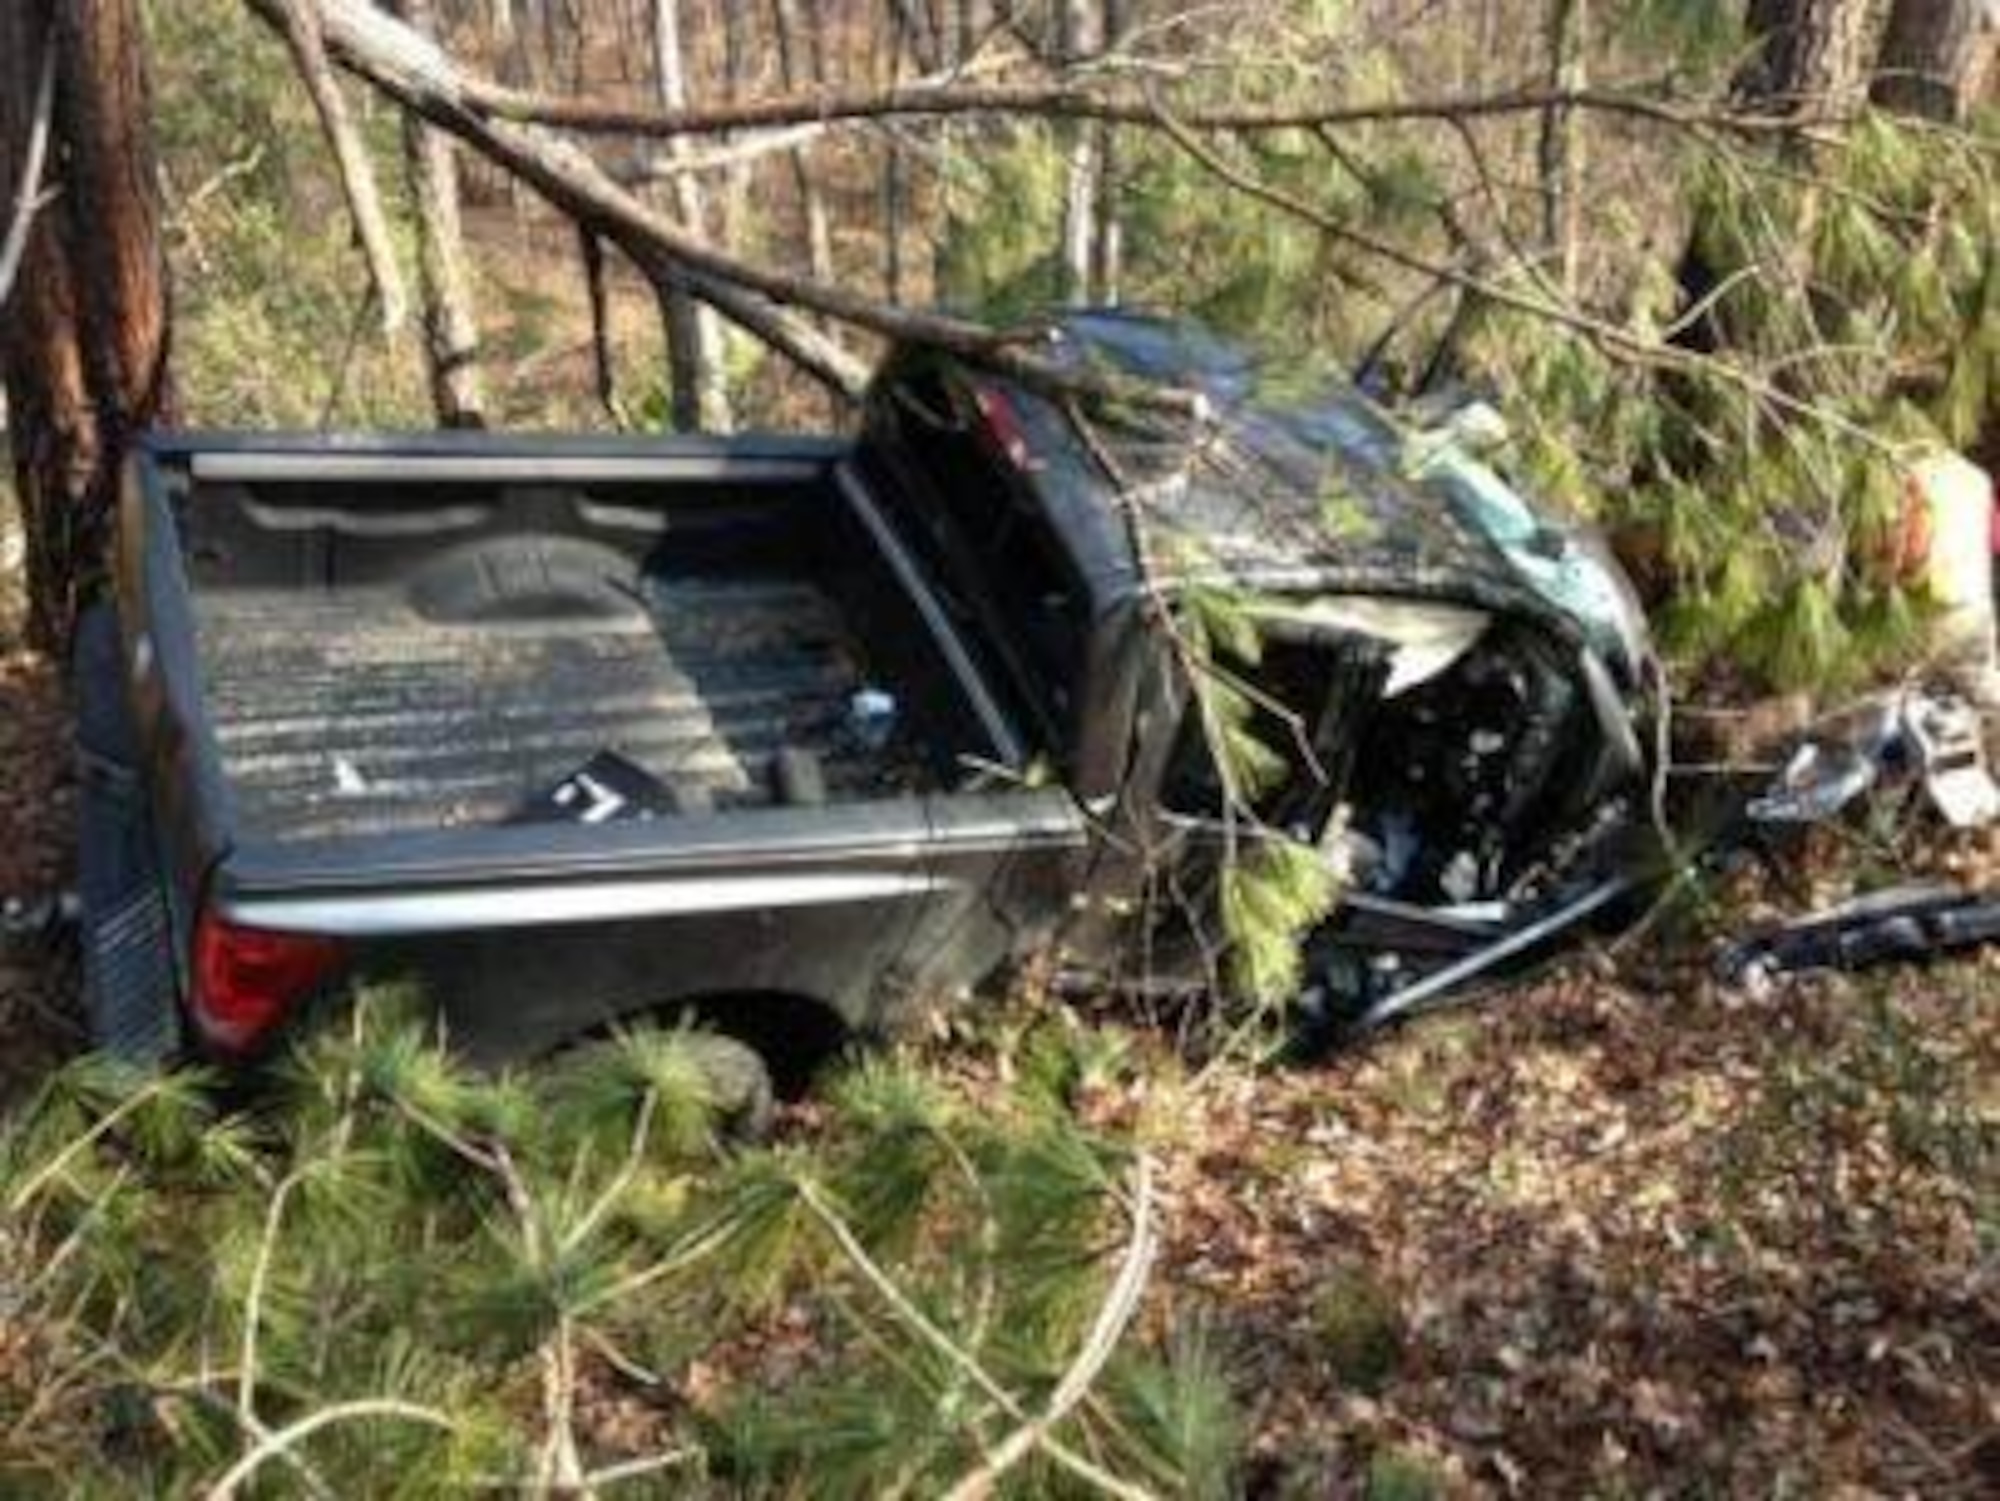 Maj. Francis Damon Friedman, the director of operations at the 21st Special Tactics Squadron, Pope Field, N.C., smashed the cab window to gain access to the driver of this Toyota Tundra Jan. 29, 2013 who veered off the road into a tree-lined ditch. Friedman was the first responder on scene, applying First Aid and remaining in the truck with the victim until medics could extricate her from the vehicle. (Courtesy photo)  